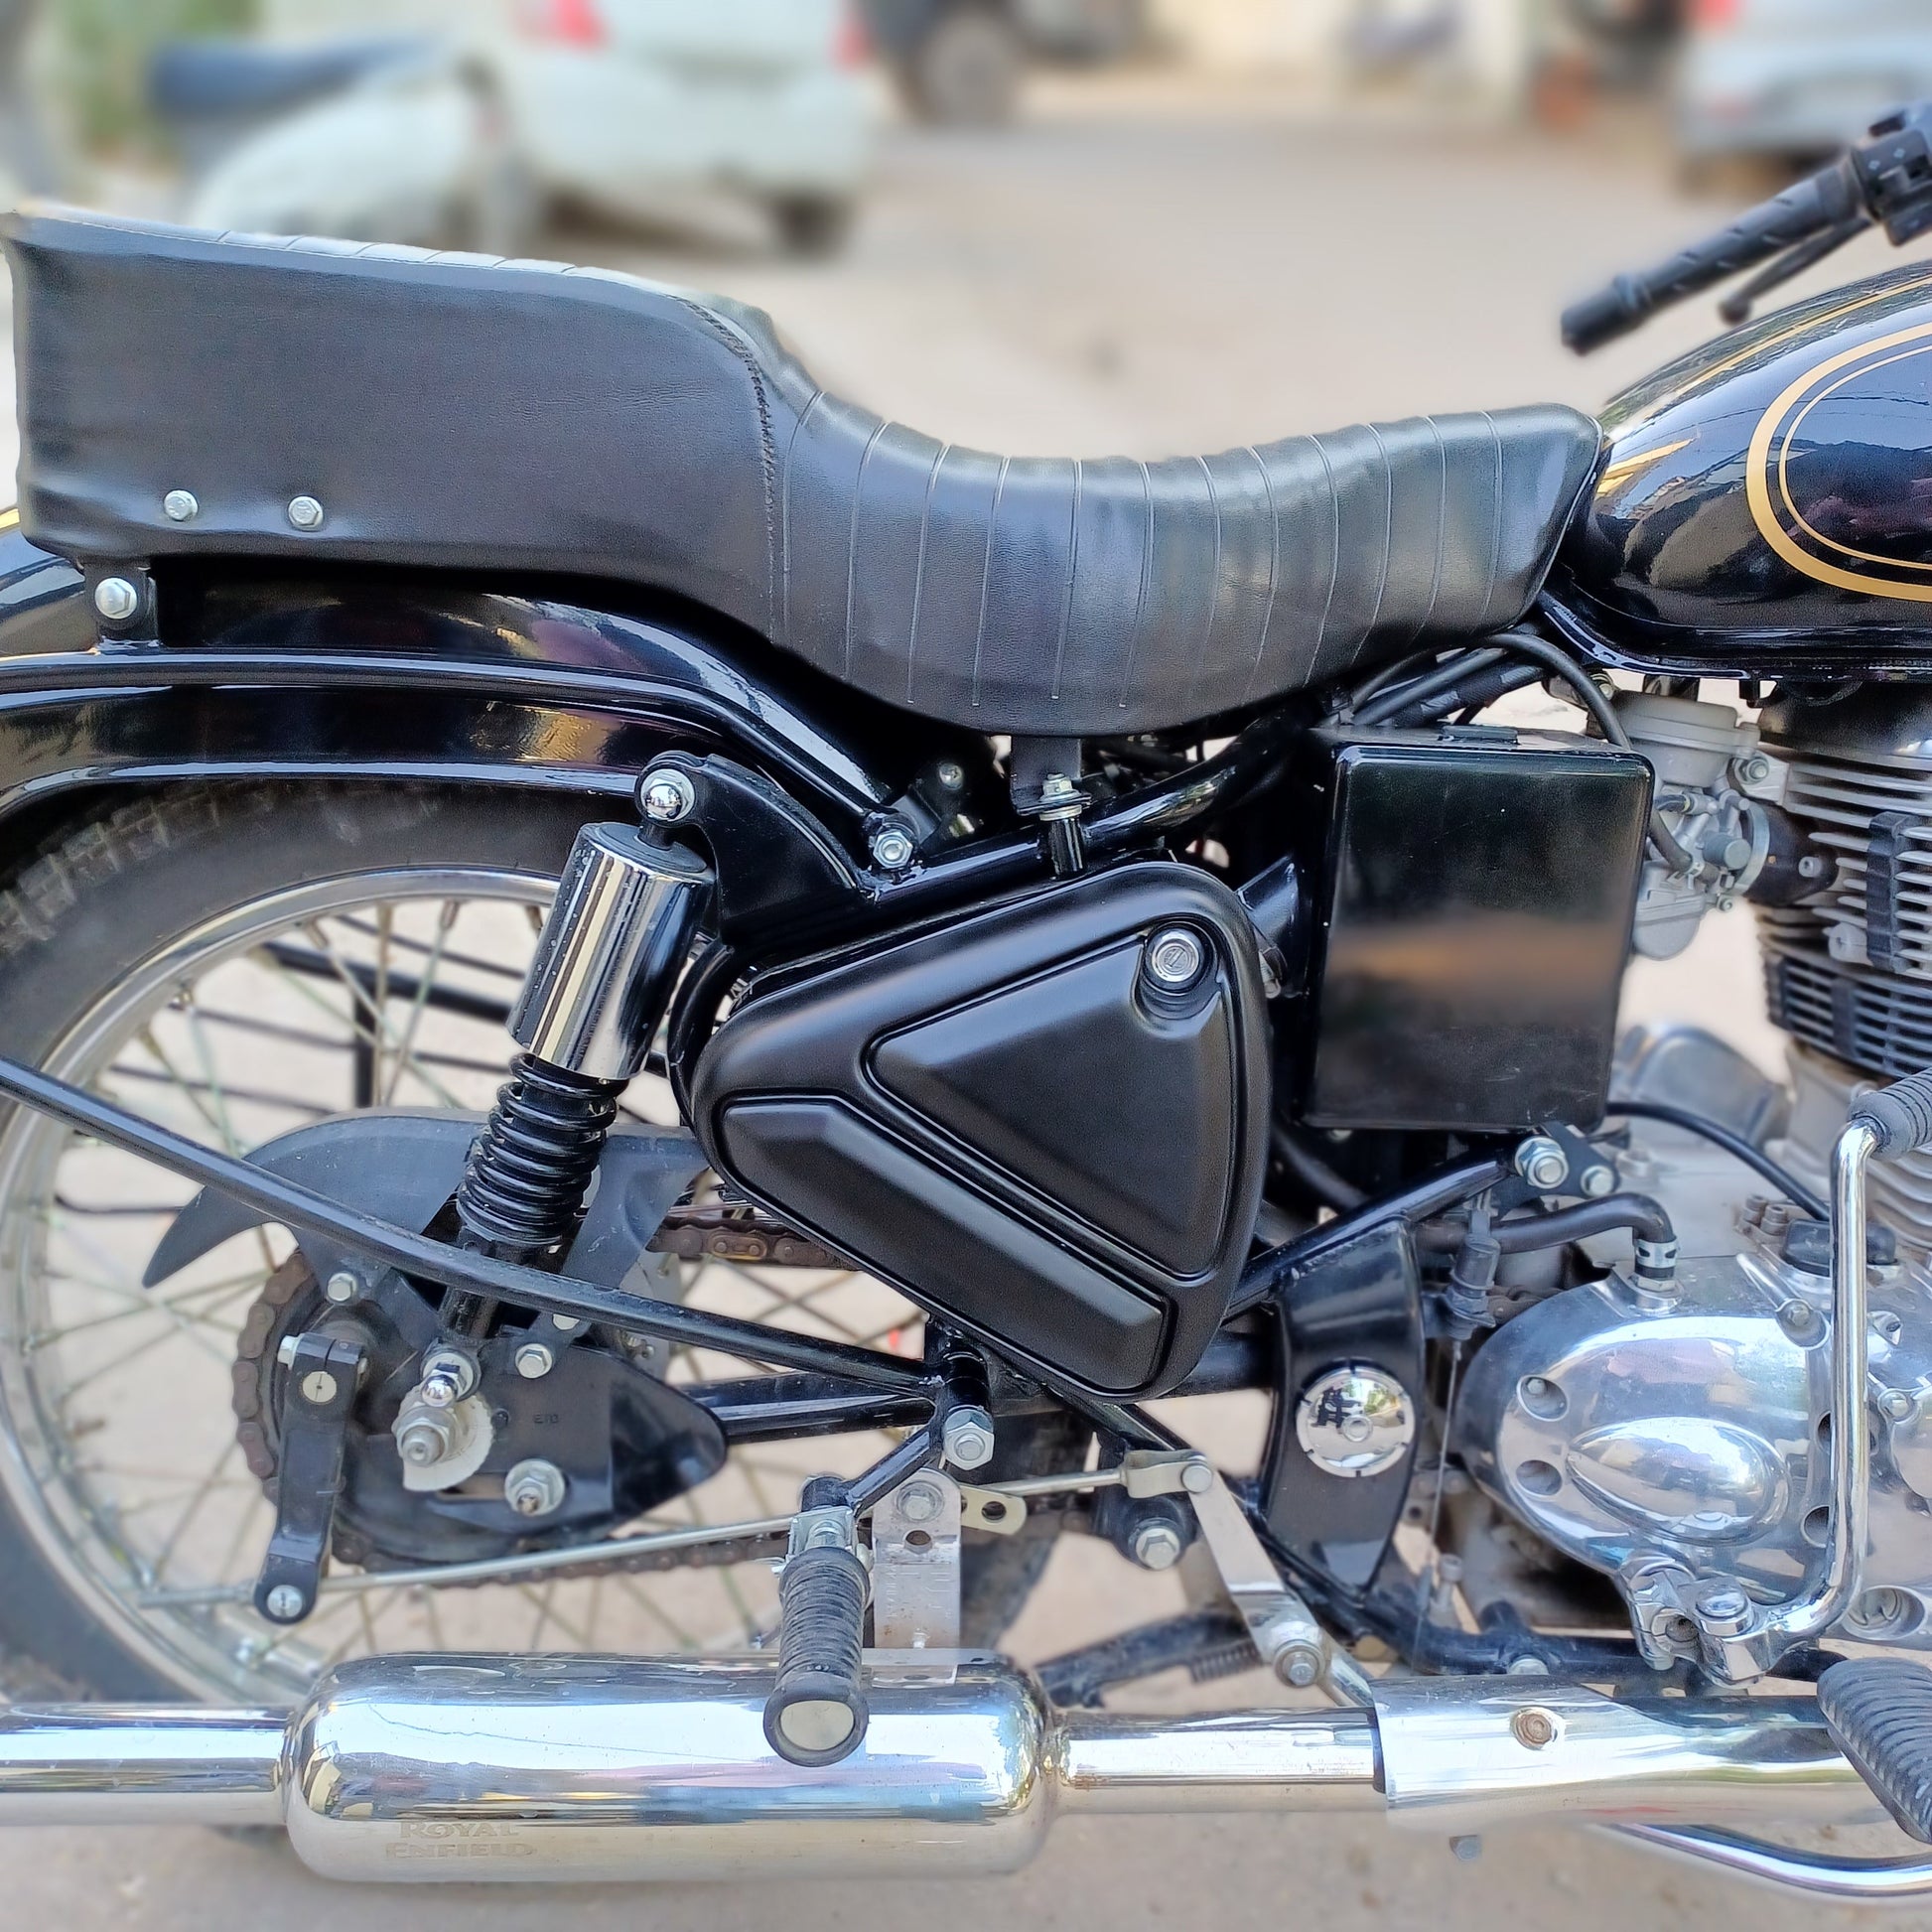 Classic 350 Accessories | Bullet Accessories | Modified Royal Enfield Classic 350 Bullet | Best RE Classic Bullet Modification | Stylish Tool Box Cover | Bull Buckle | Saiga Parts for Royal Enfield Classic Bullet Electra Standard